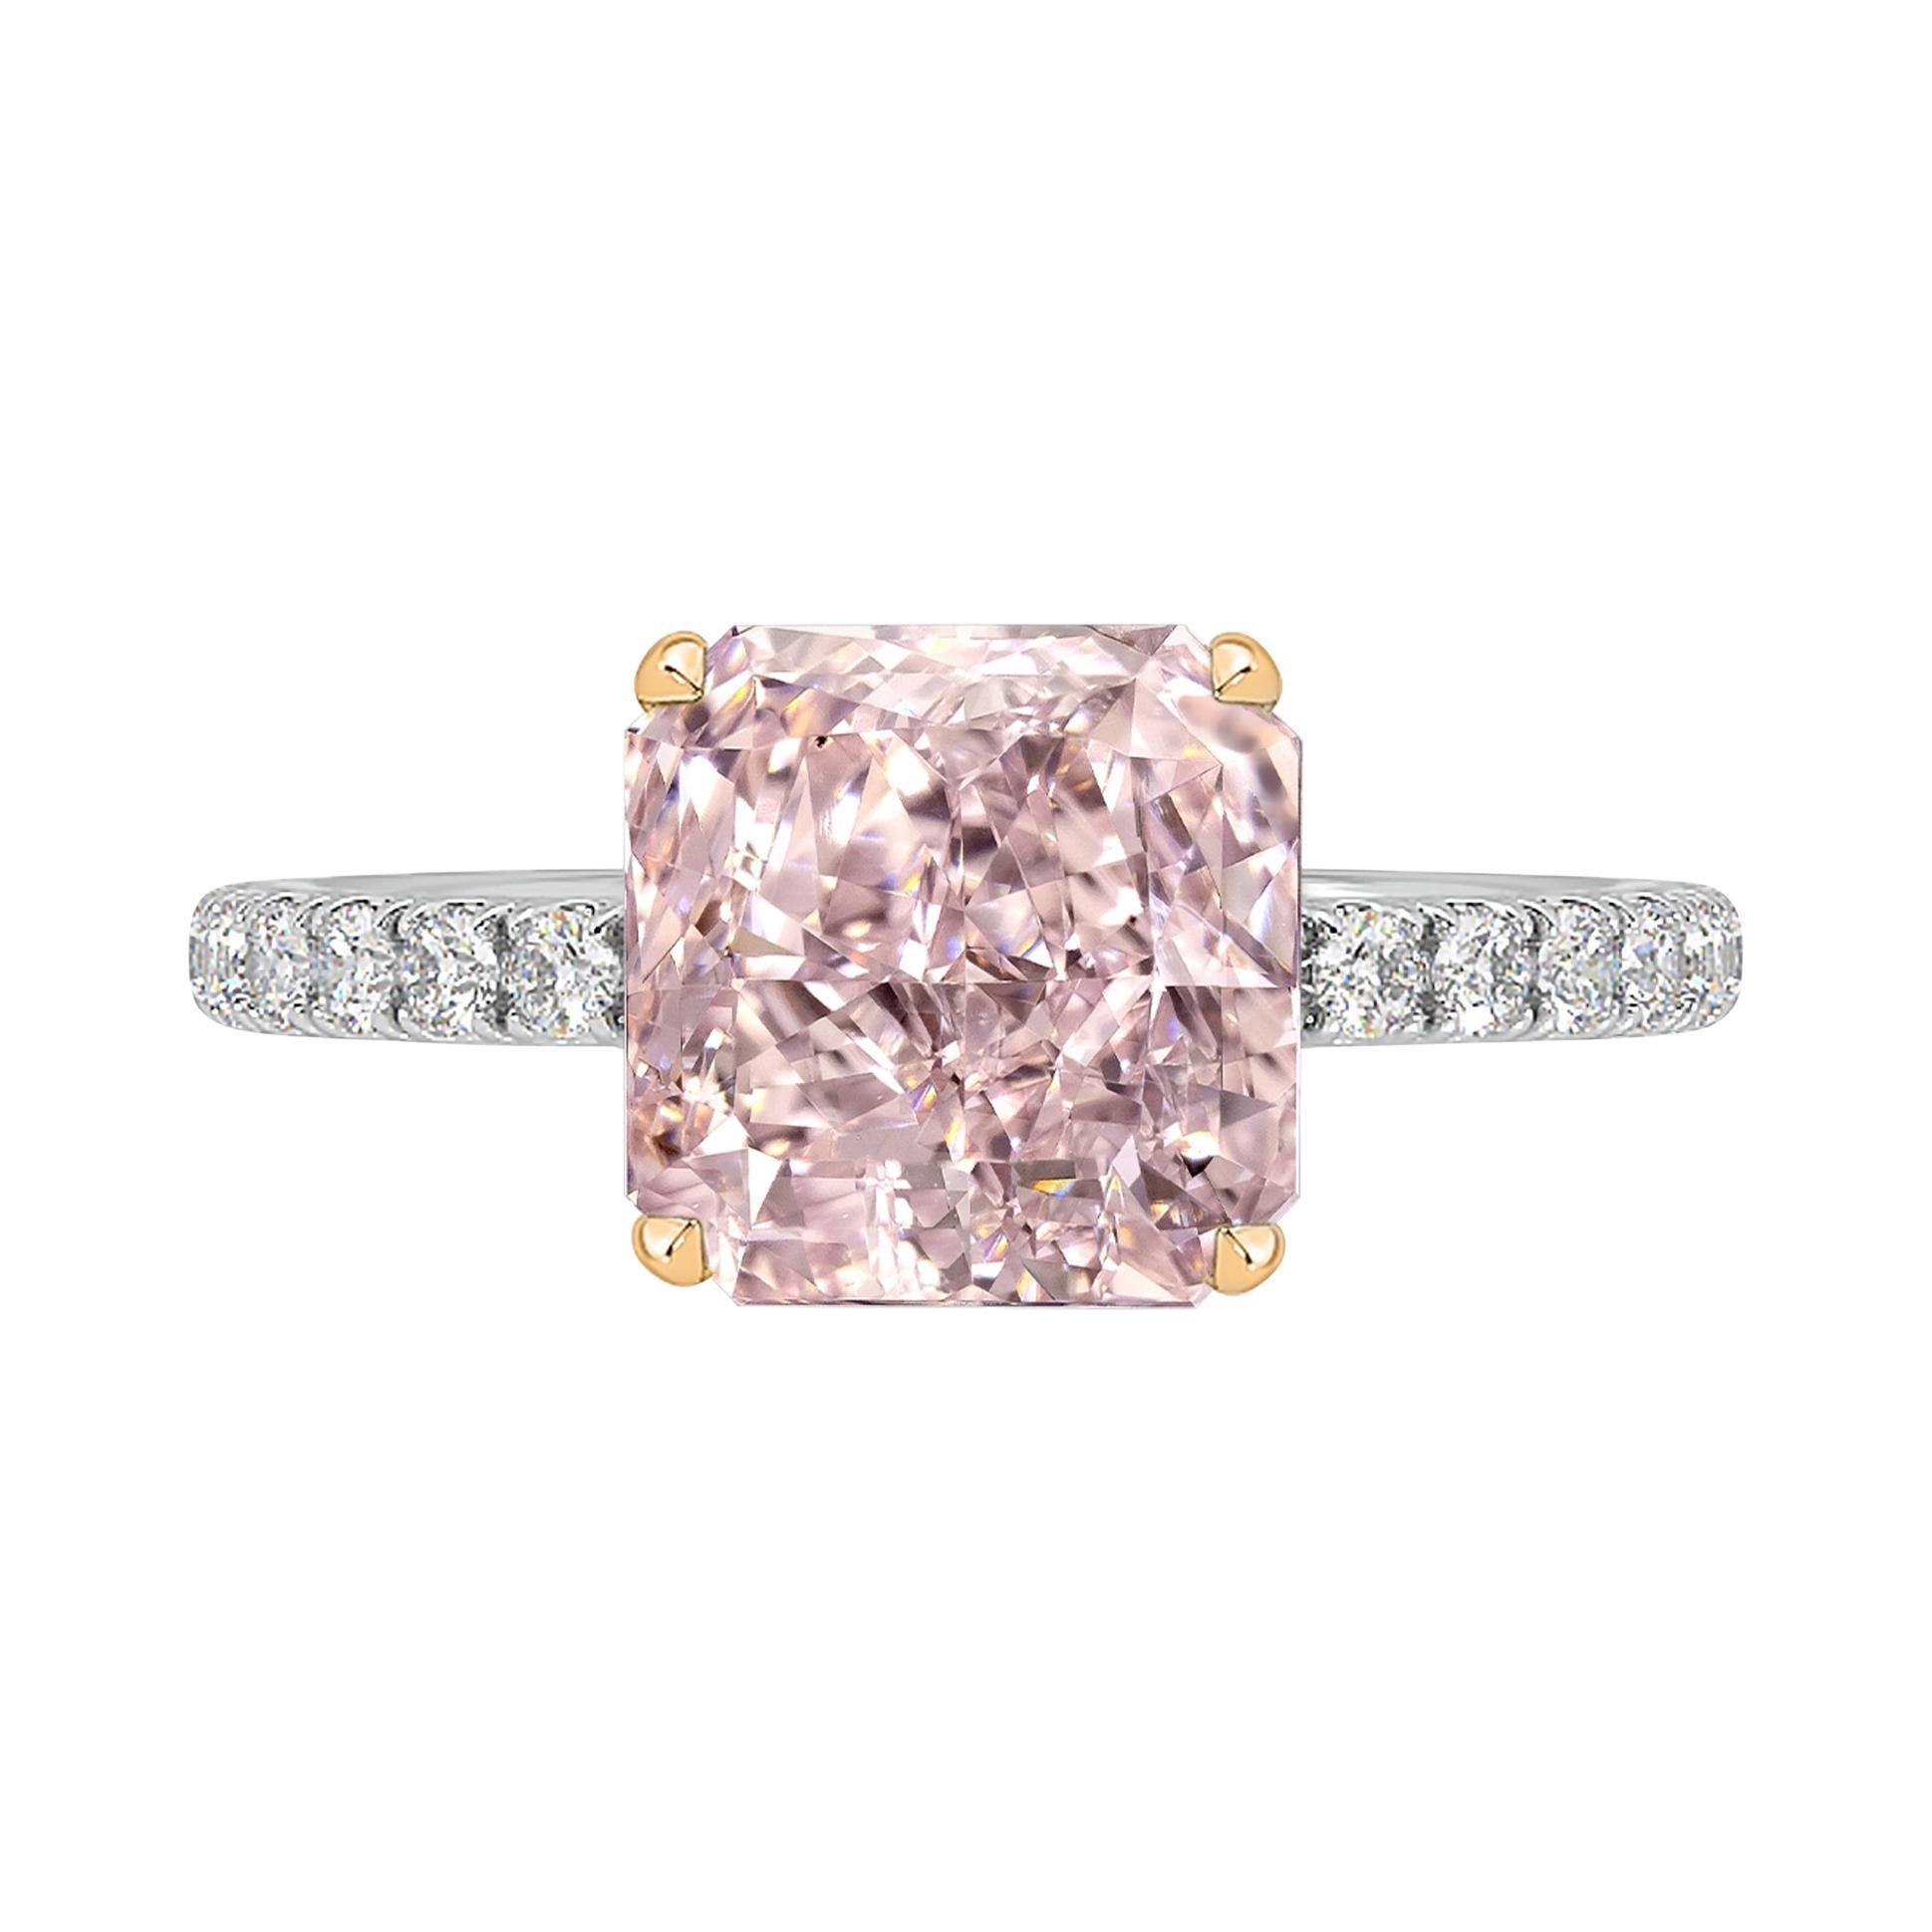 GIA Certified 1.11 Carat Radiant Cut Pink Diamond Ring For Sale